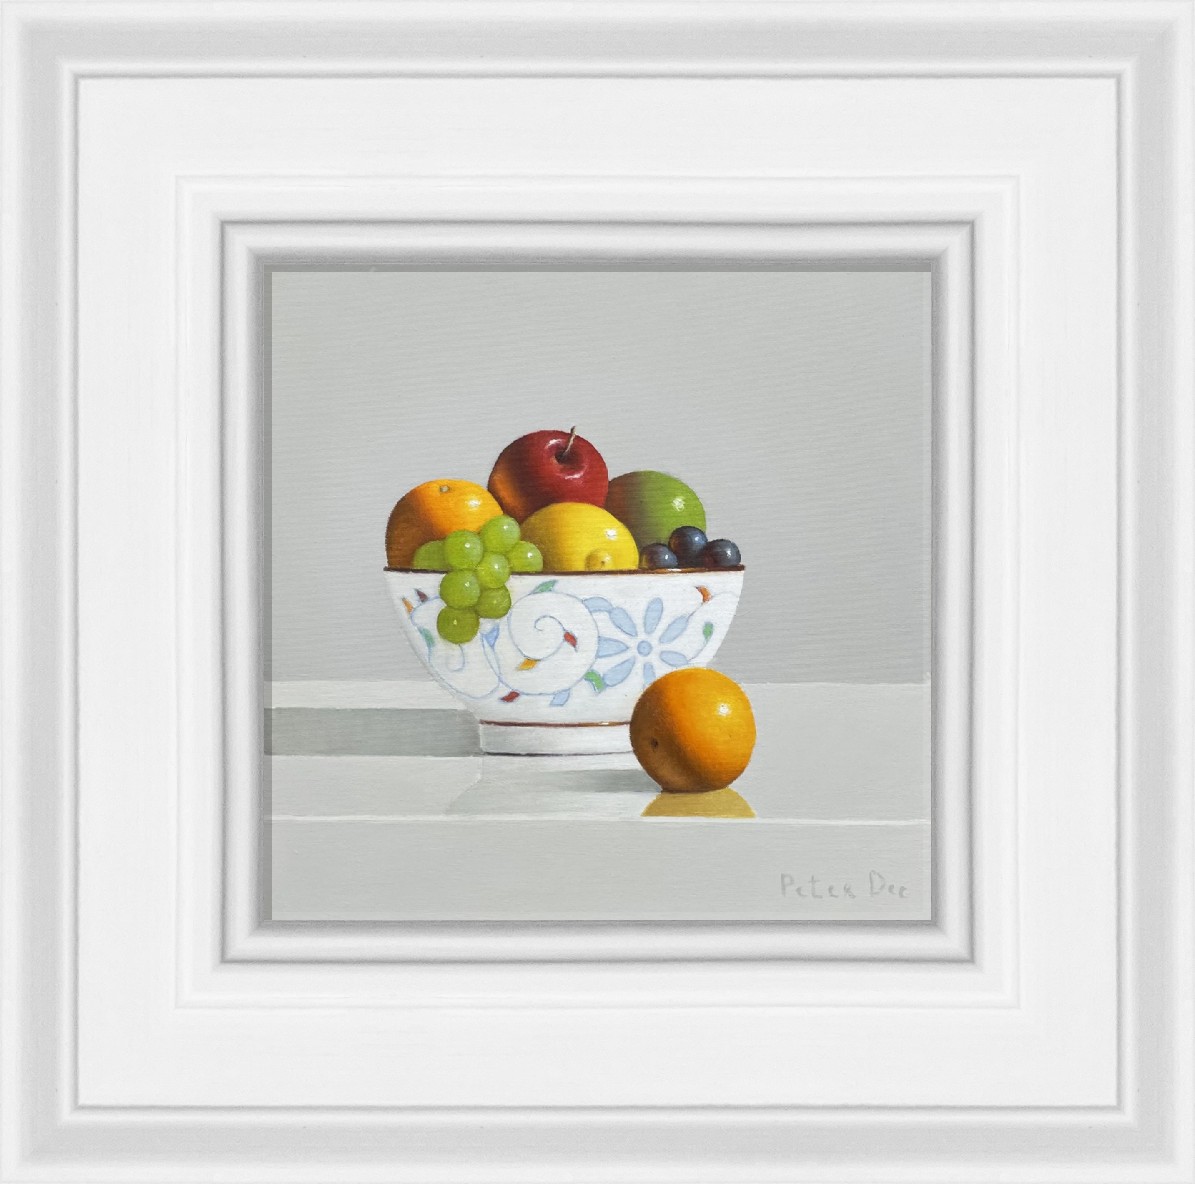 Bowl of Fruit by Peter Dee